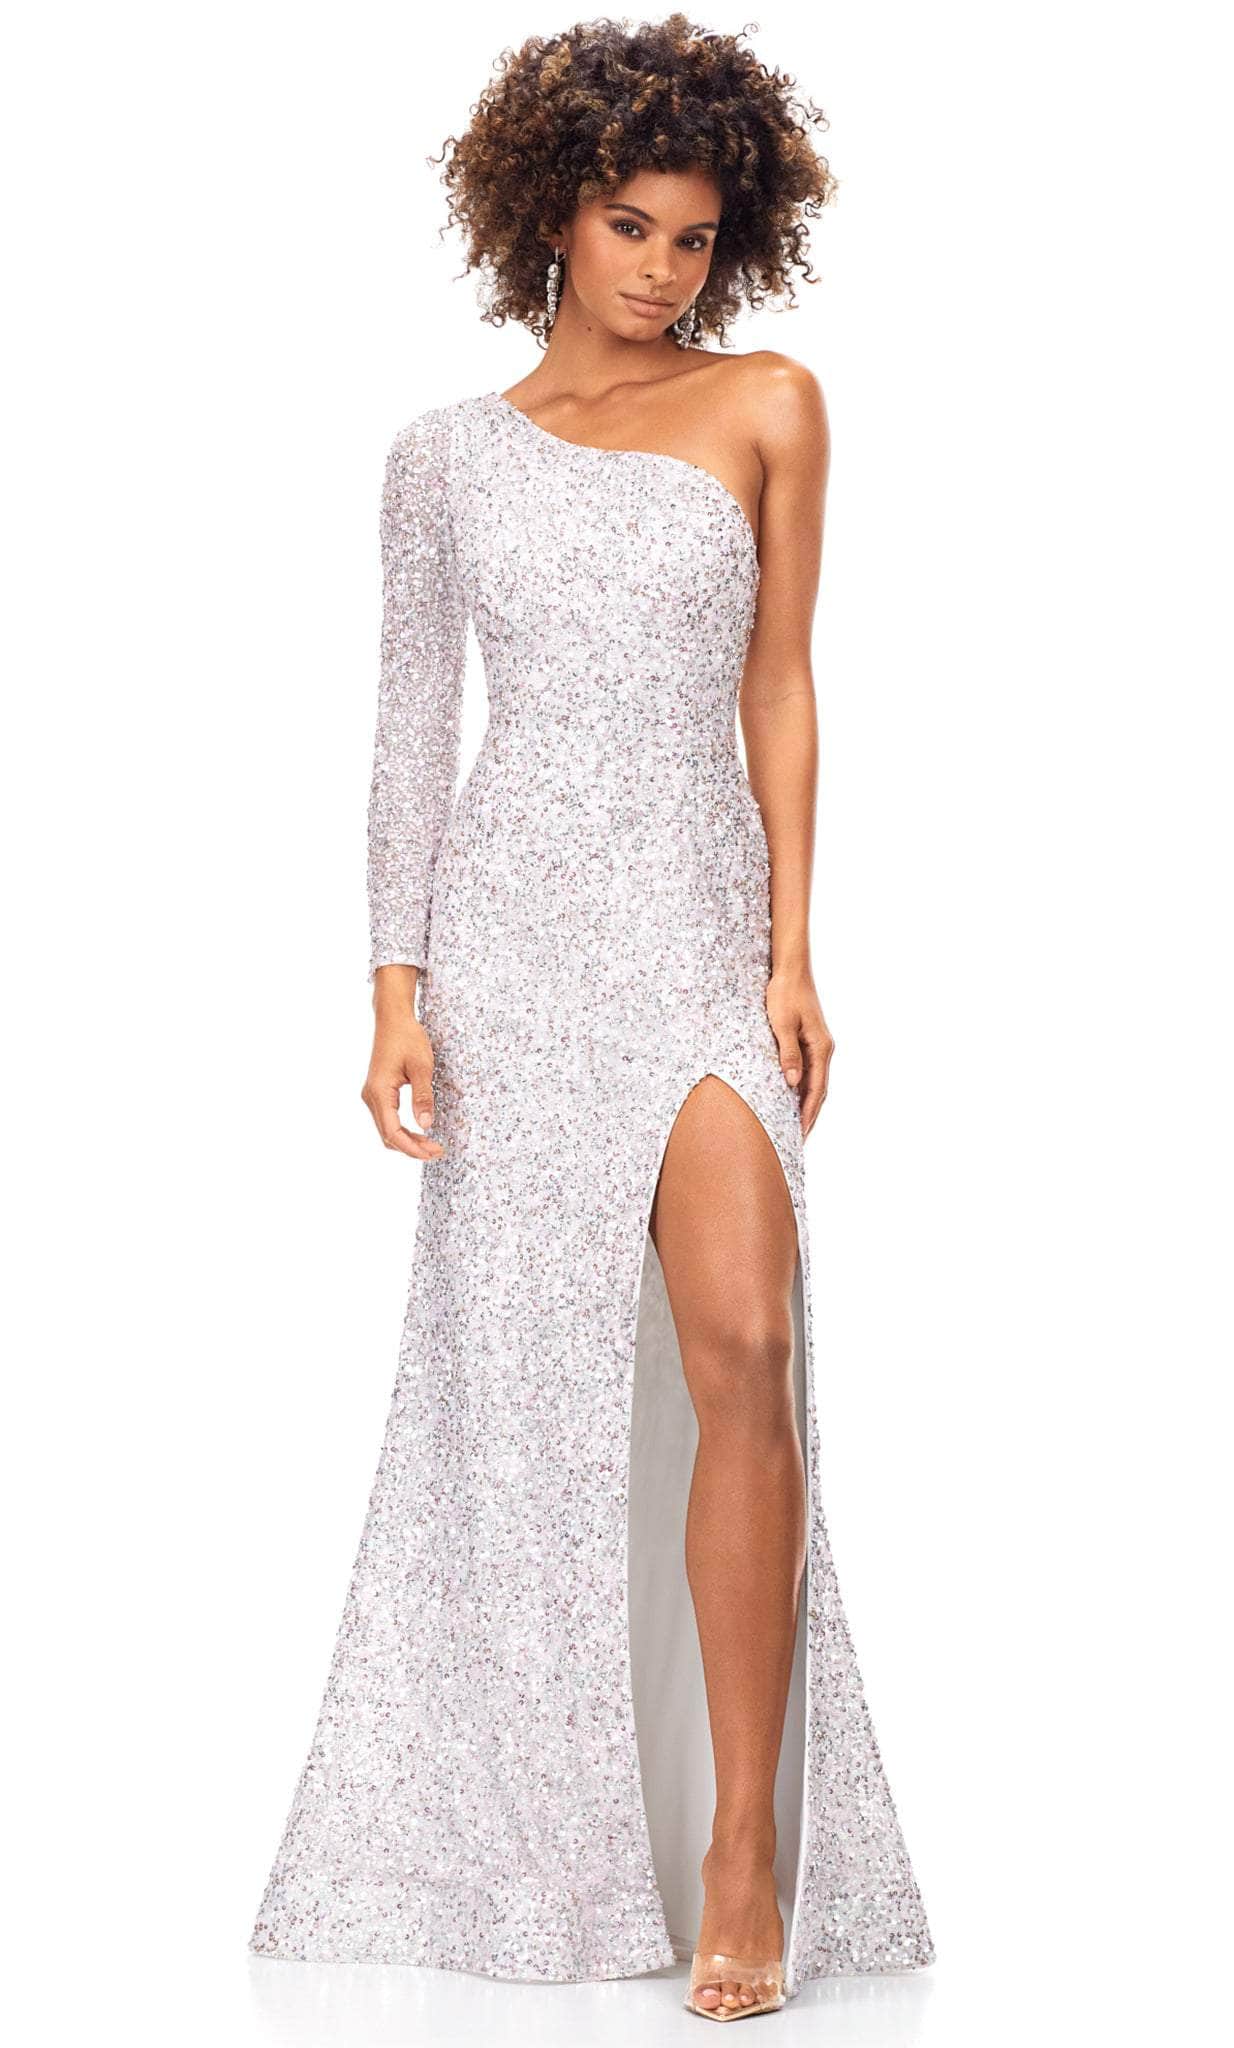 Image of Ashley Lauren 1977 - Sequined Asymmetric Neck Evening Gown